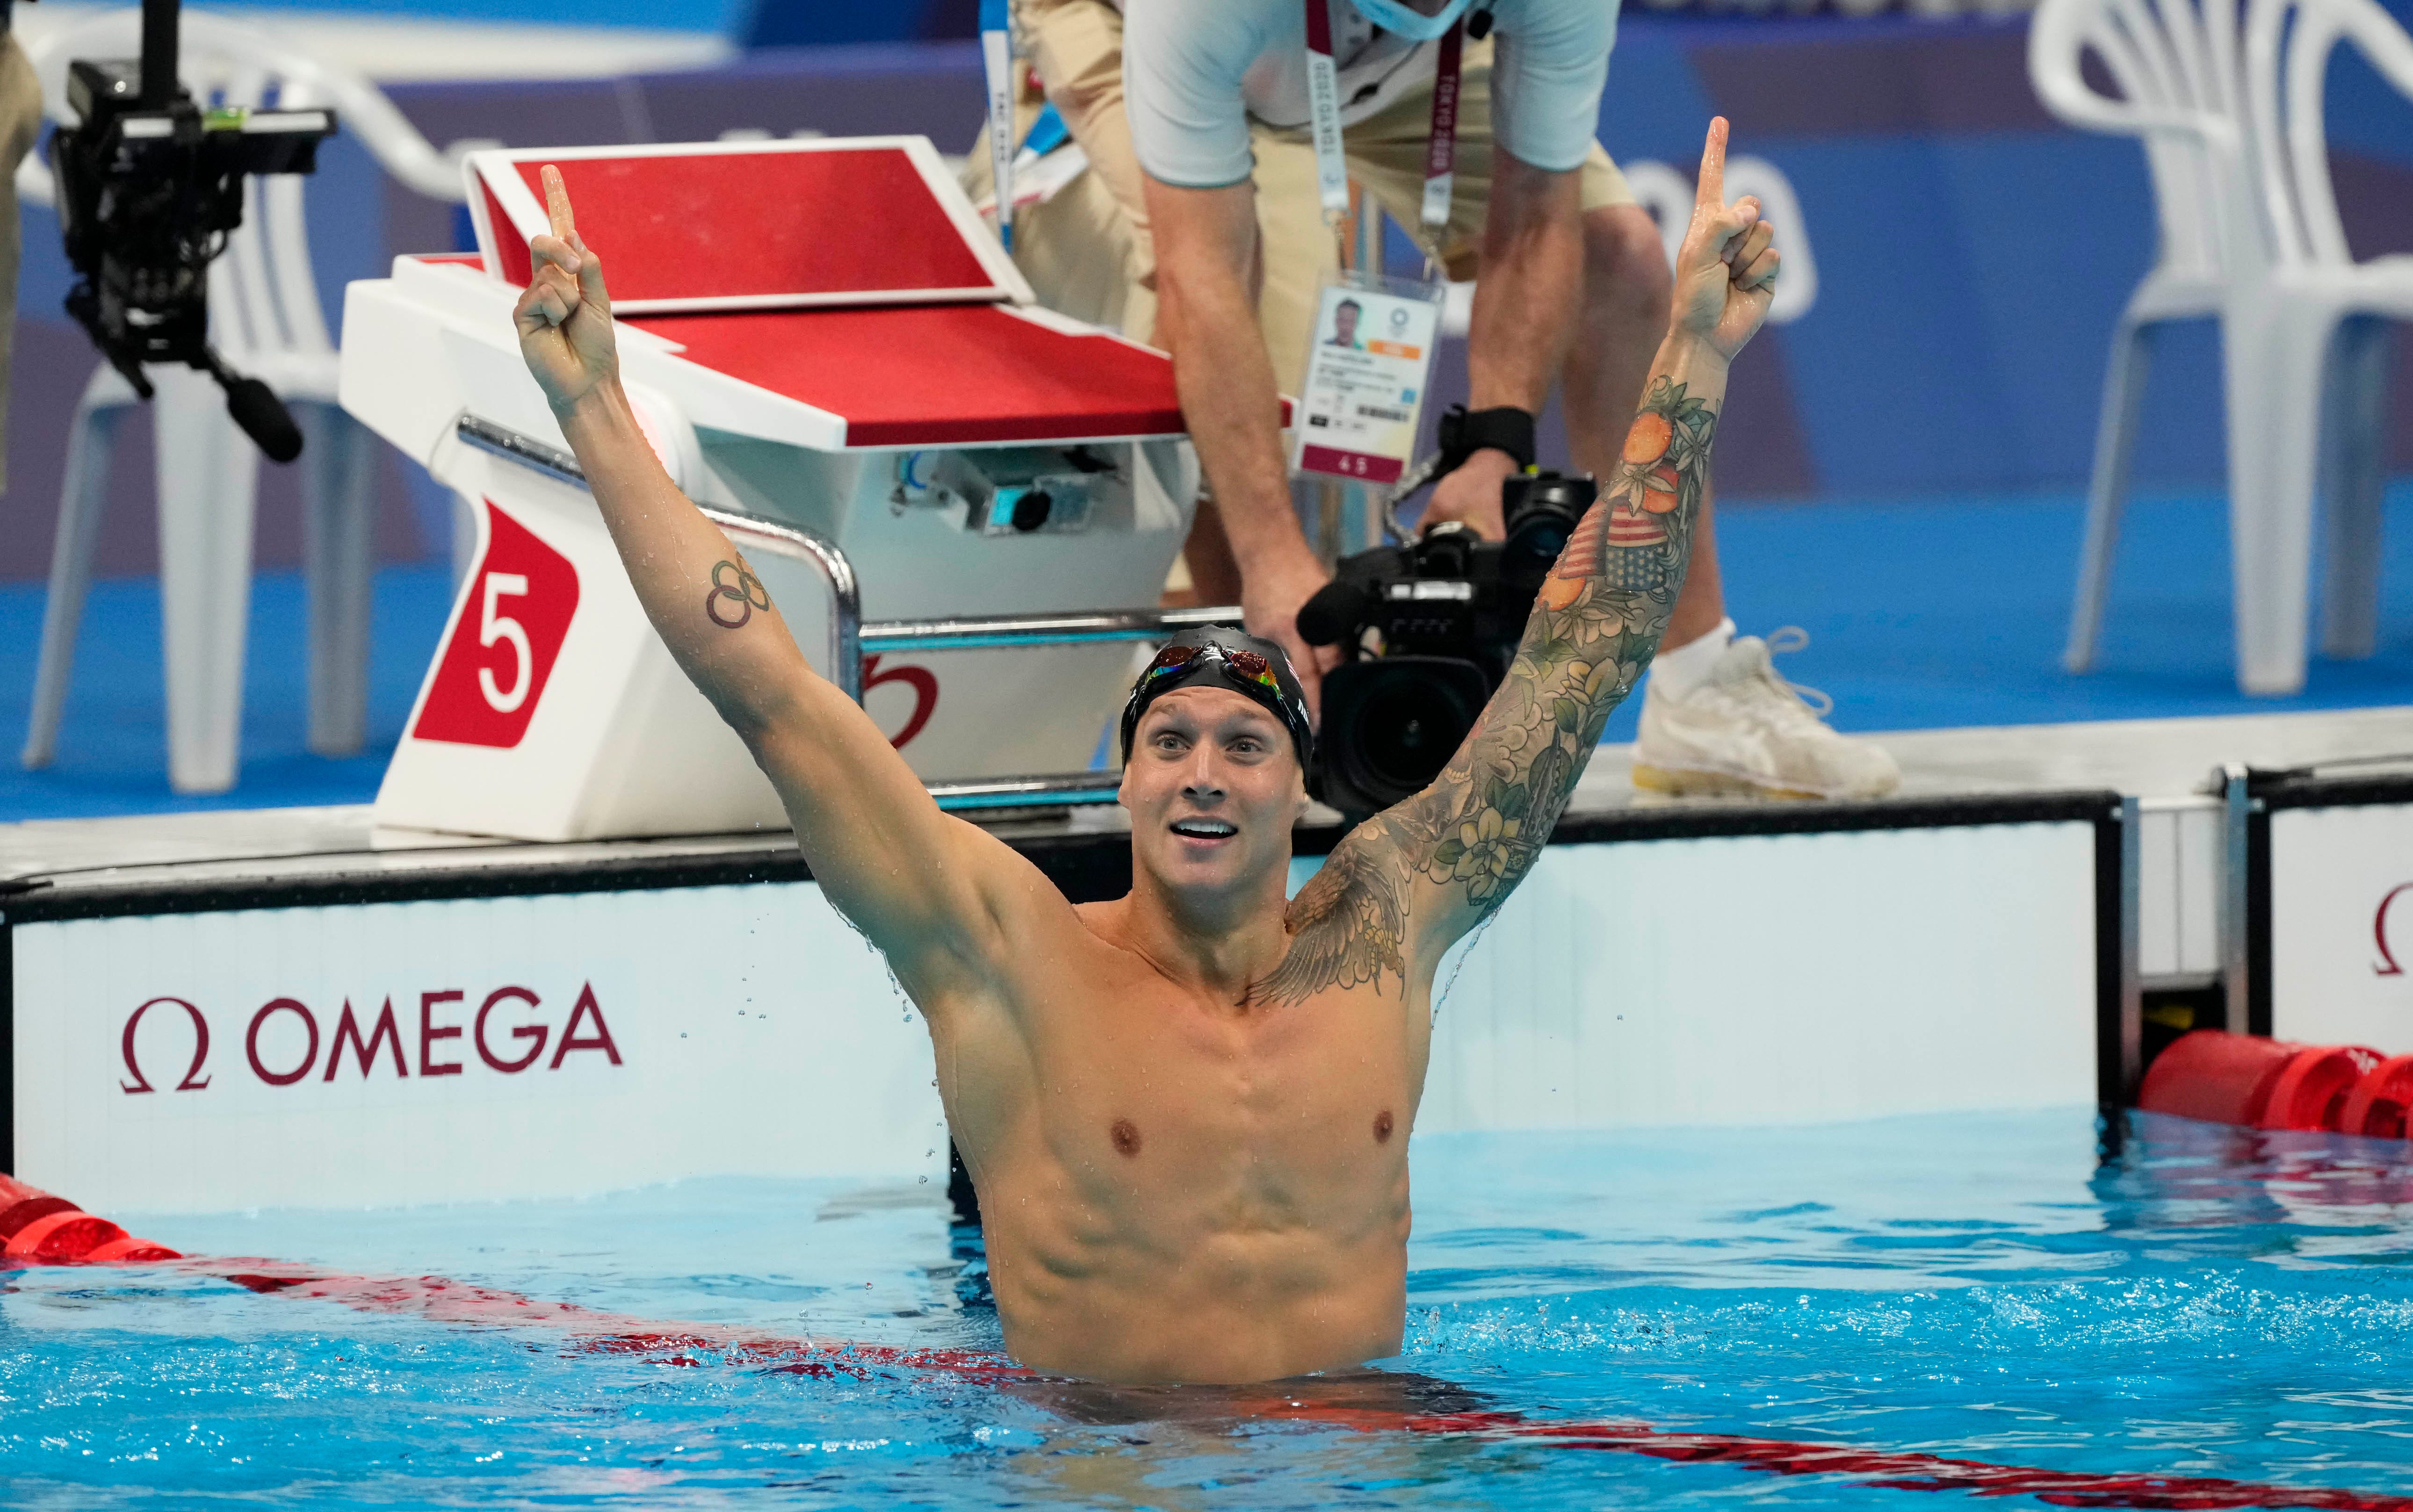 Caeleb Dressel (USA) celebrates after winning the men's 100m freestyle final during the Tokyo 2020 Olympic Summer Games at Tokyo Aquatics Centre on Jul 29, 2021.